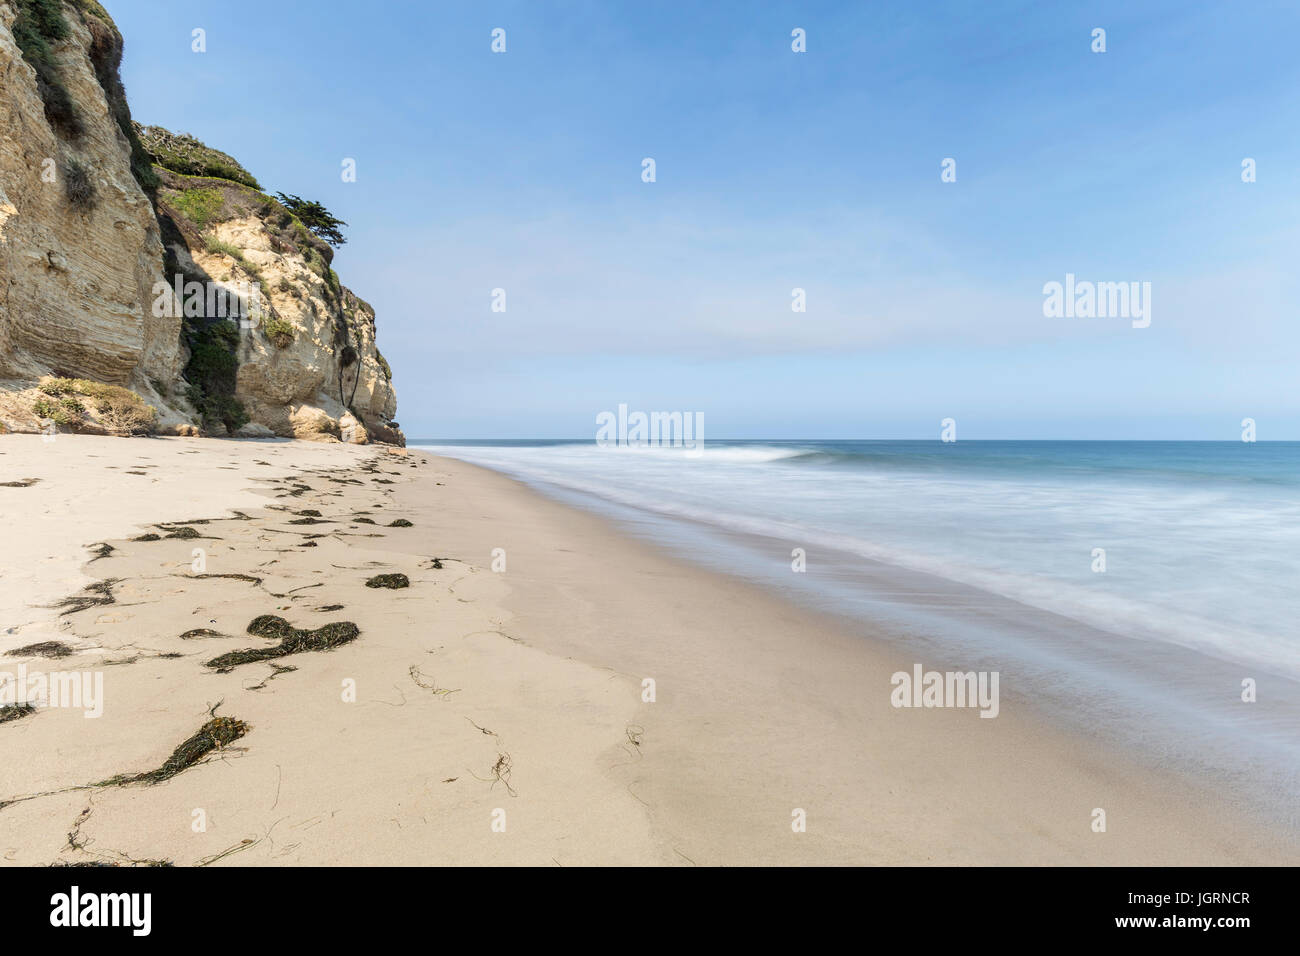 Secluded Dume Cove beach with motion blur water near Los Angeles in Malibu, California. Stock Photo